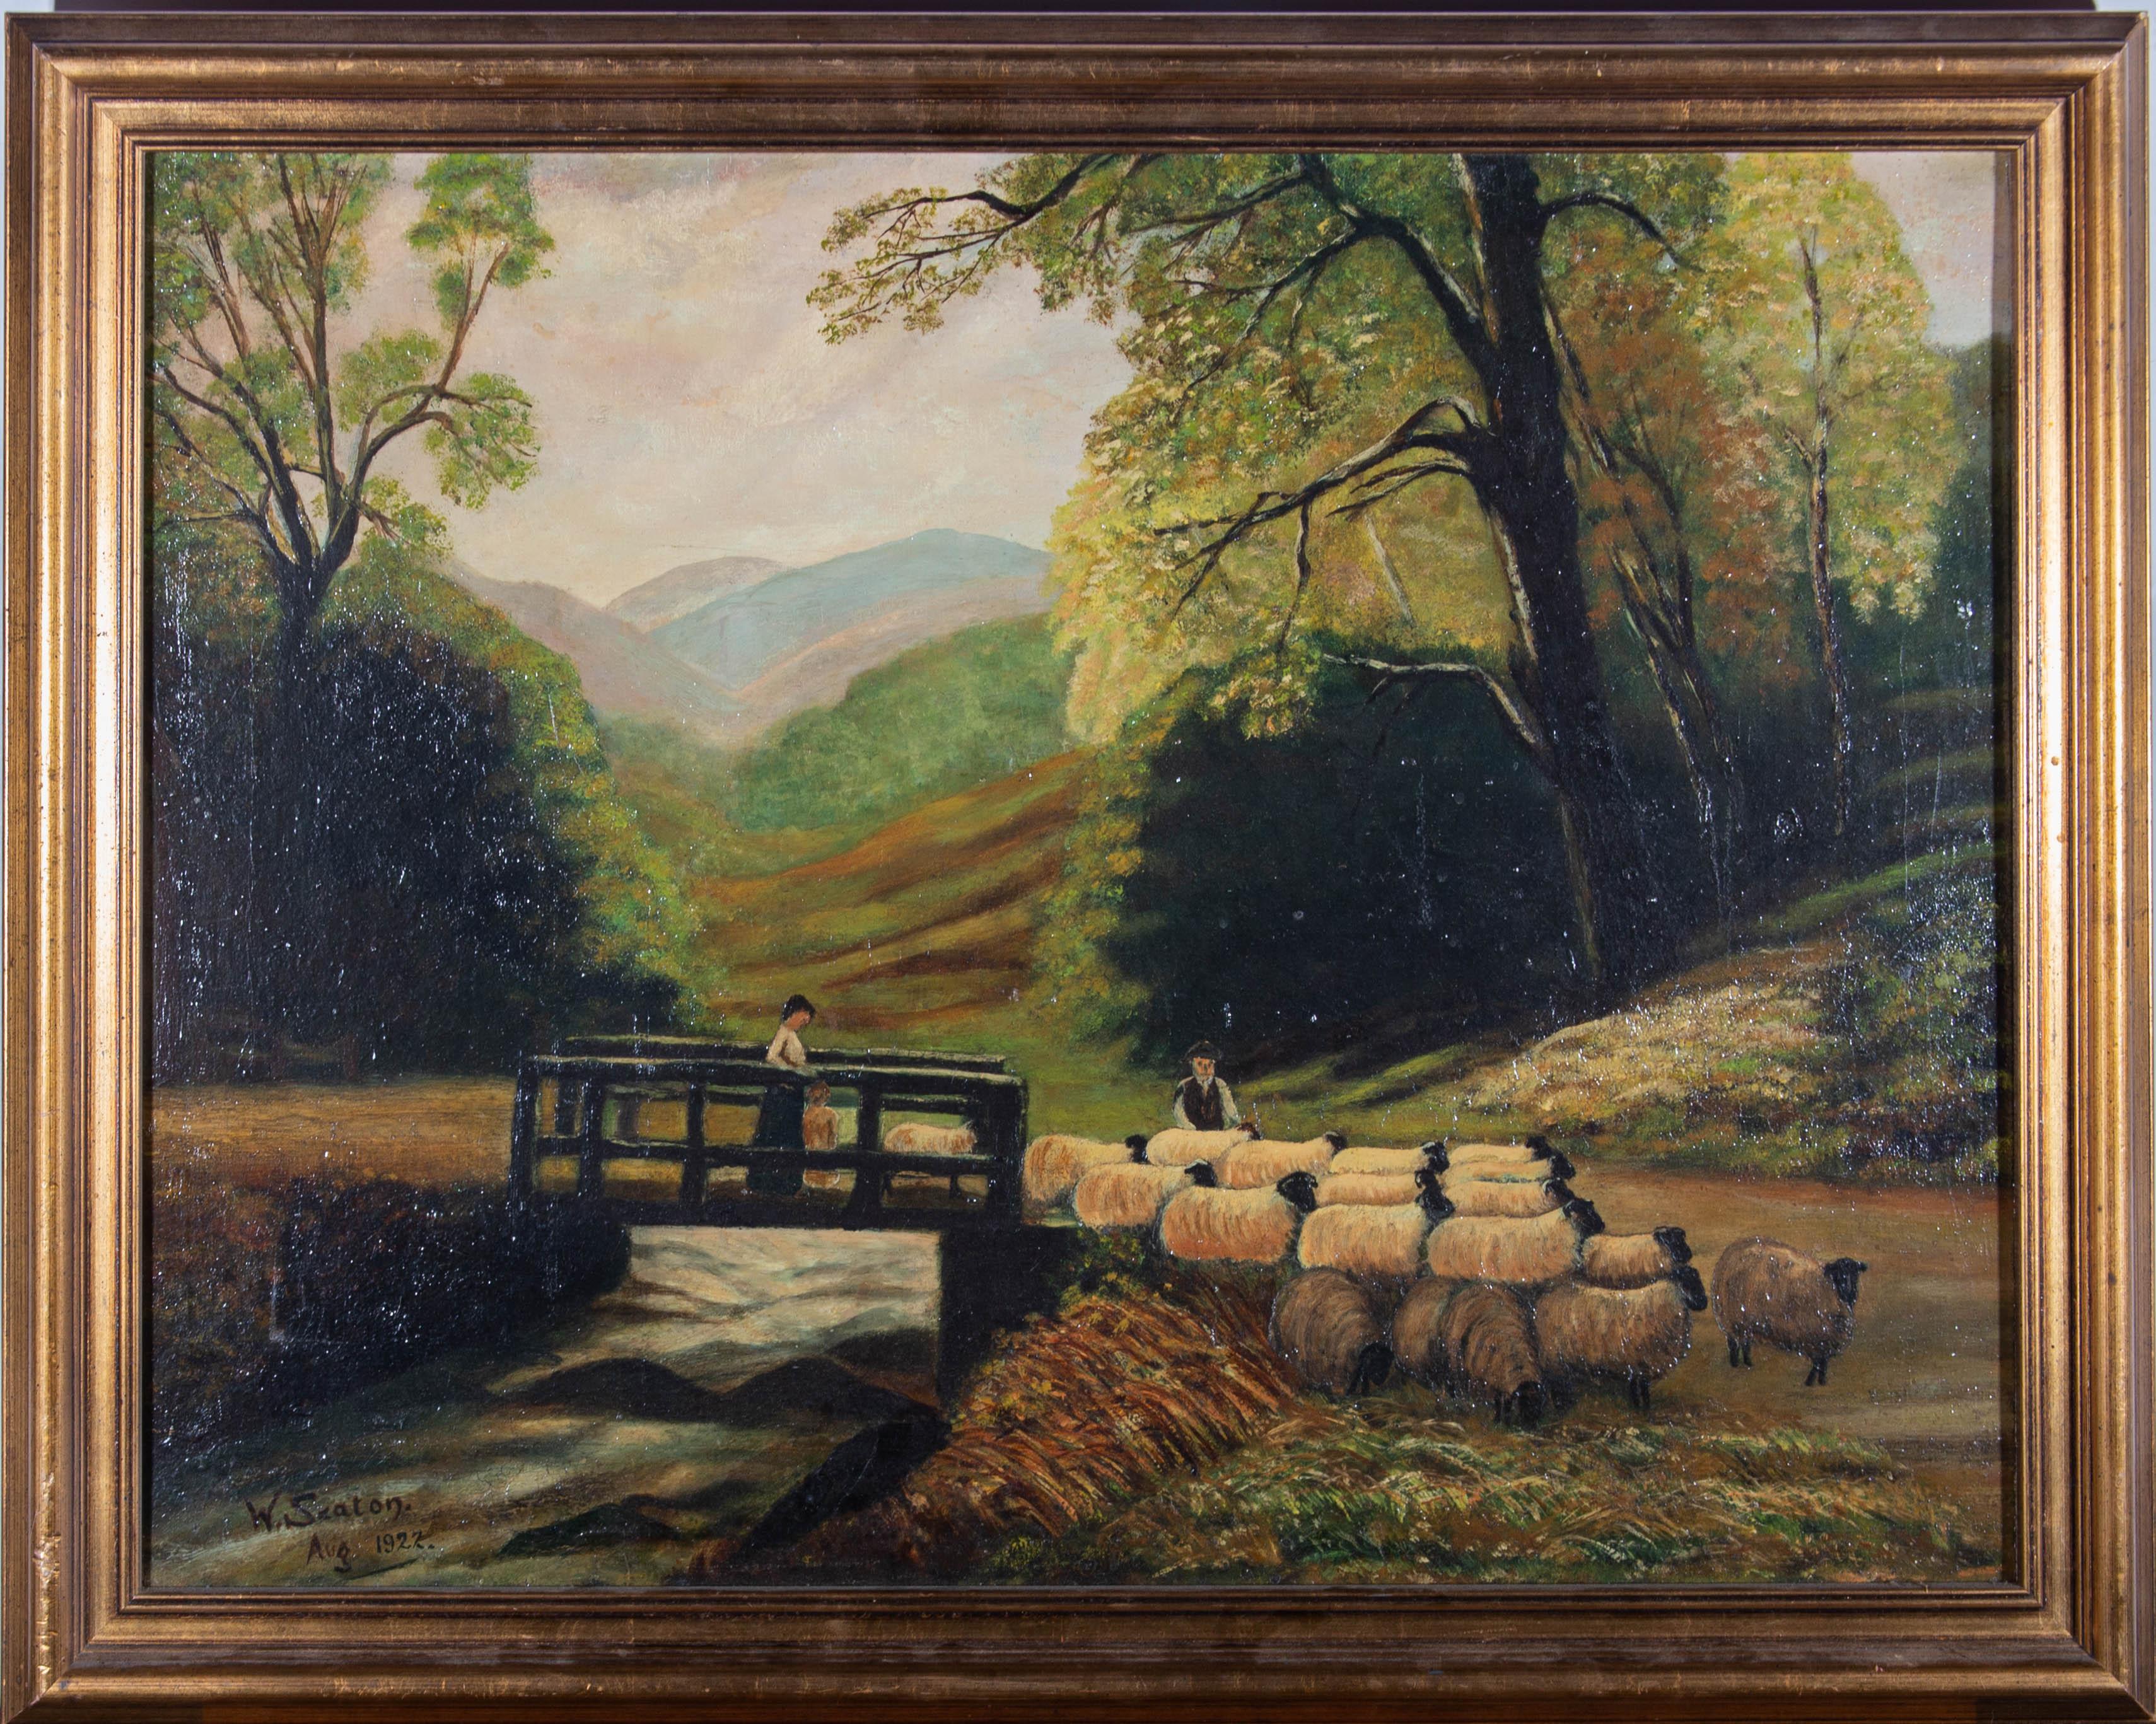 Farmers shepard a herd of sheep over a slow river in the quiet countryside. With a plethora of earthy, natural greens, Scaton has captured the ambiance of a country walk in this fine rendition. The painting is well presented in a gilded wood frame